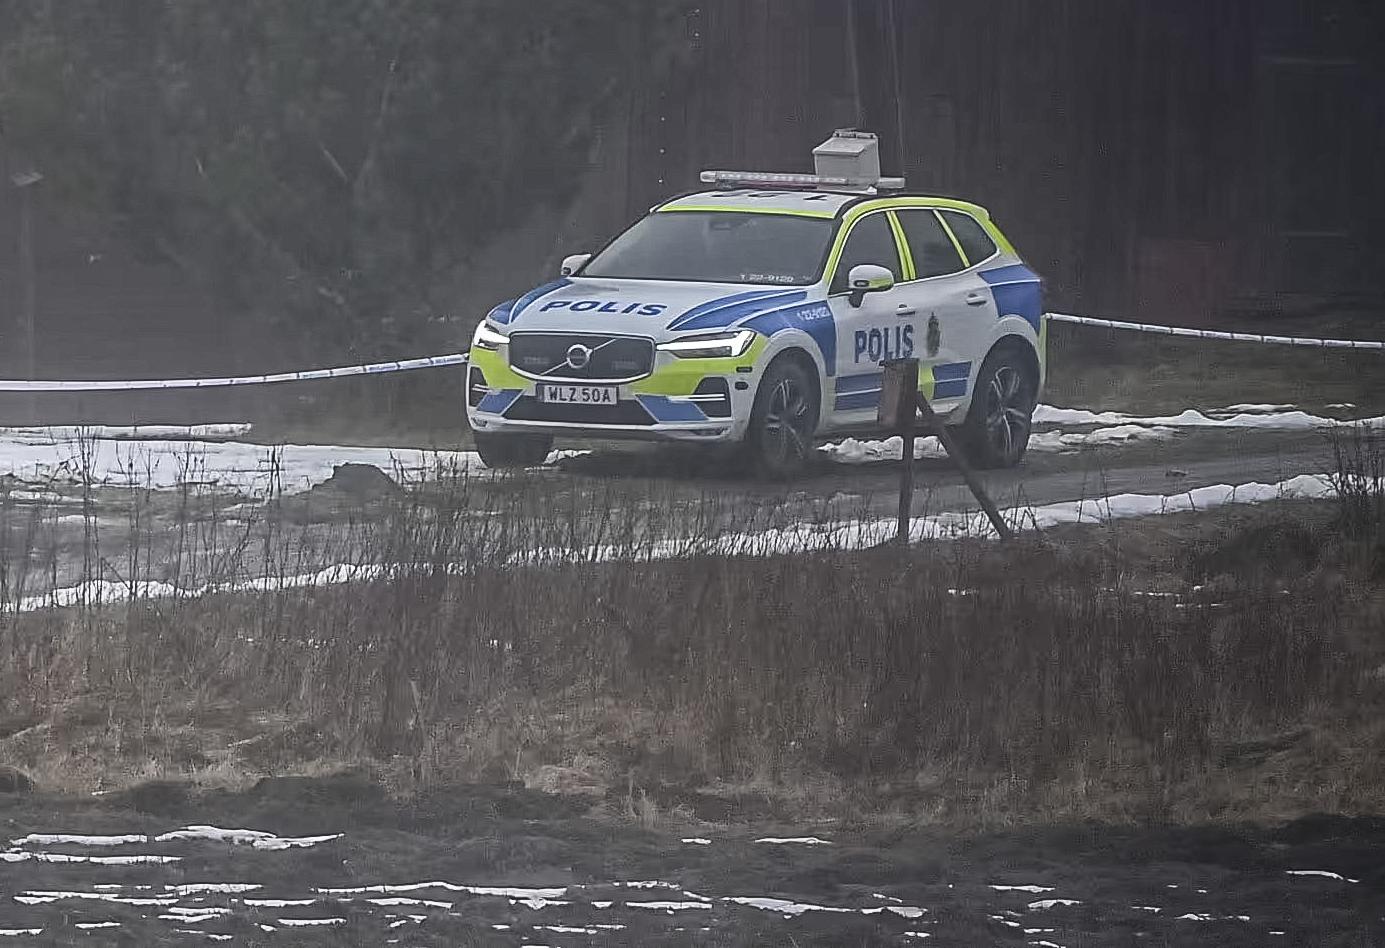 Aftonbladet: A dead woman was found in the refrigerator